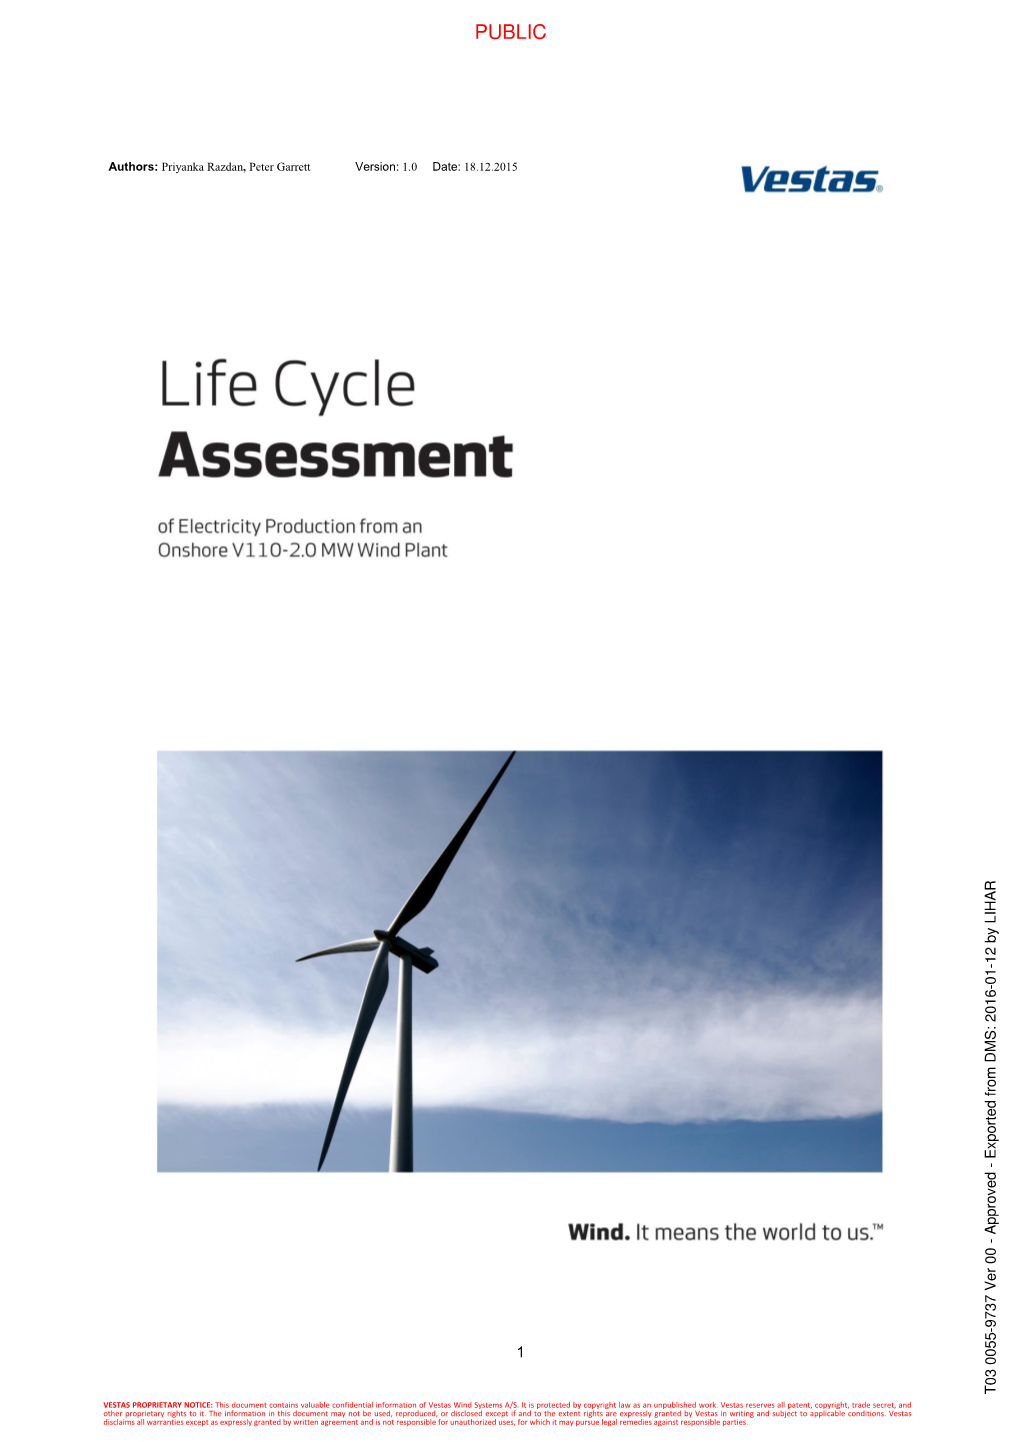 Life Cycle Assessment of Electricity Production from an Onshore V110-2.0 MW Wind Plant